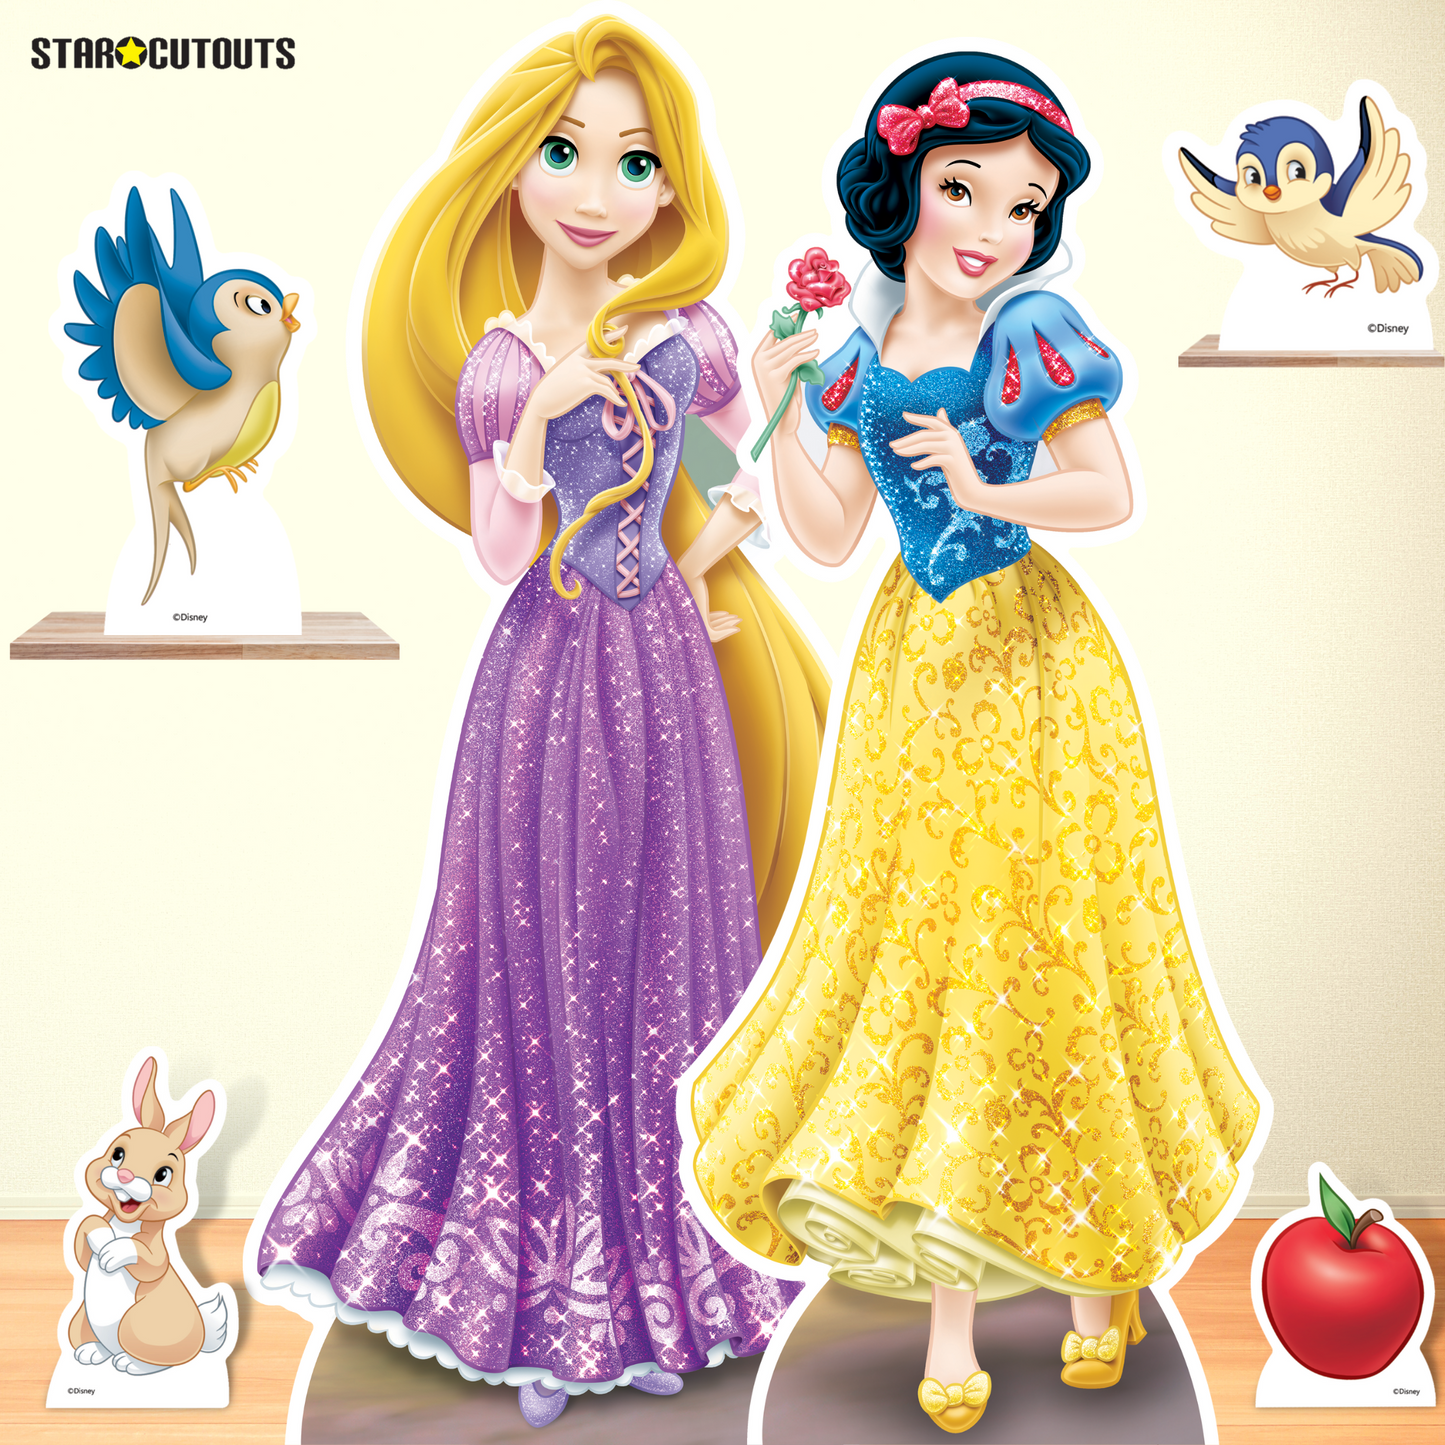 Snow White Cardboard Cutout Party Decorations With Six Mini Party Decorations